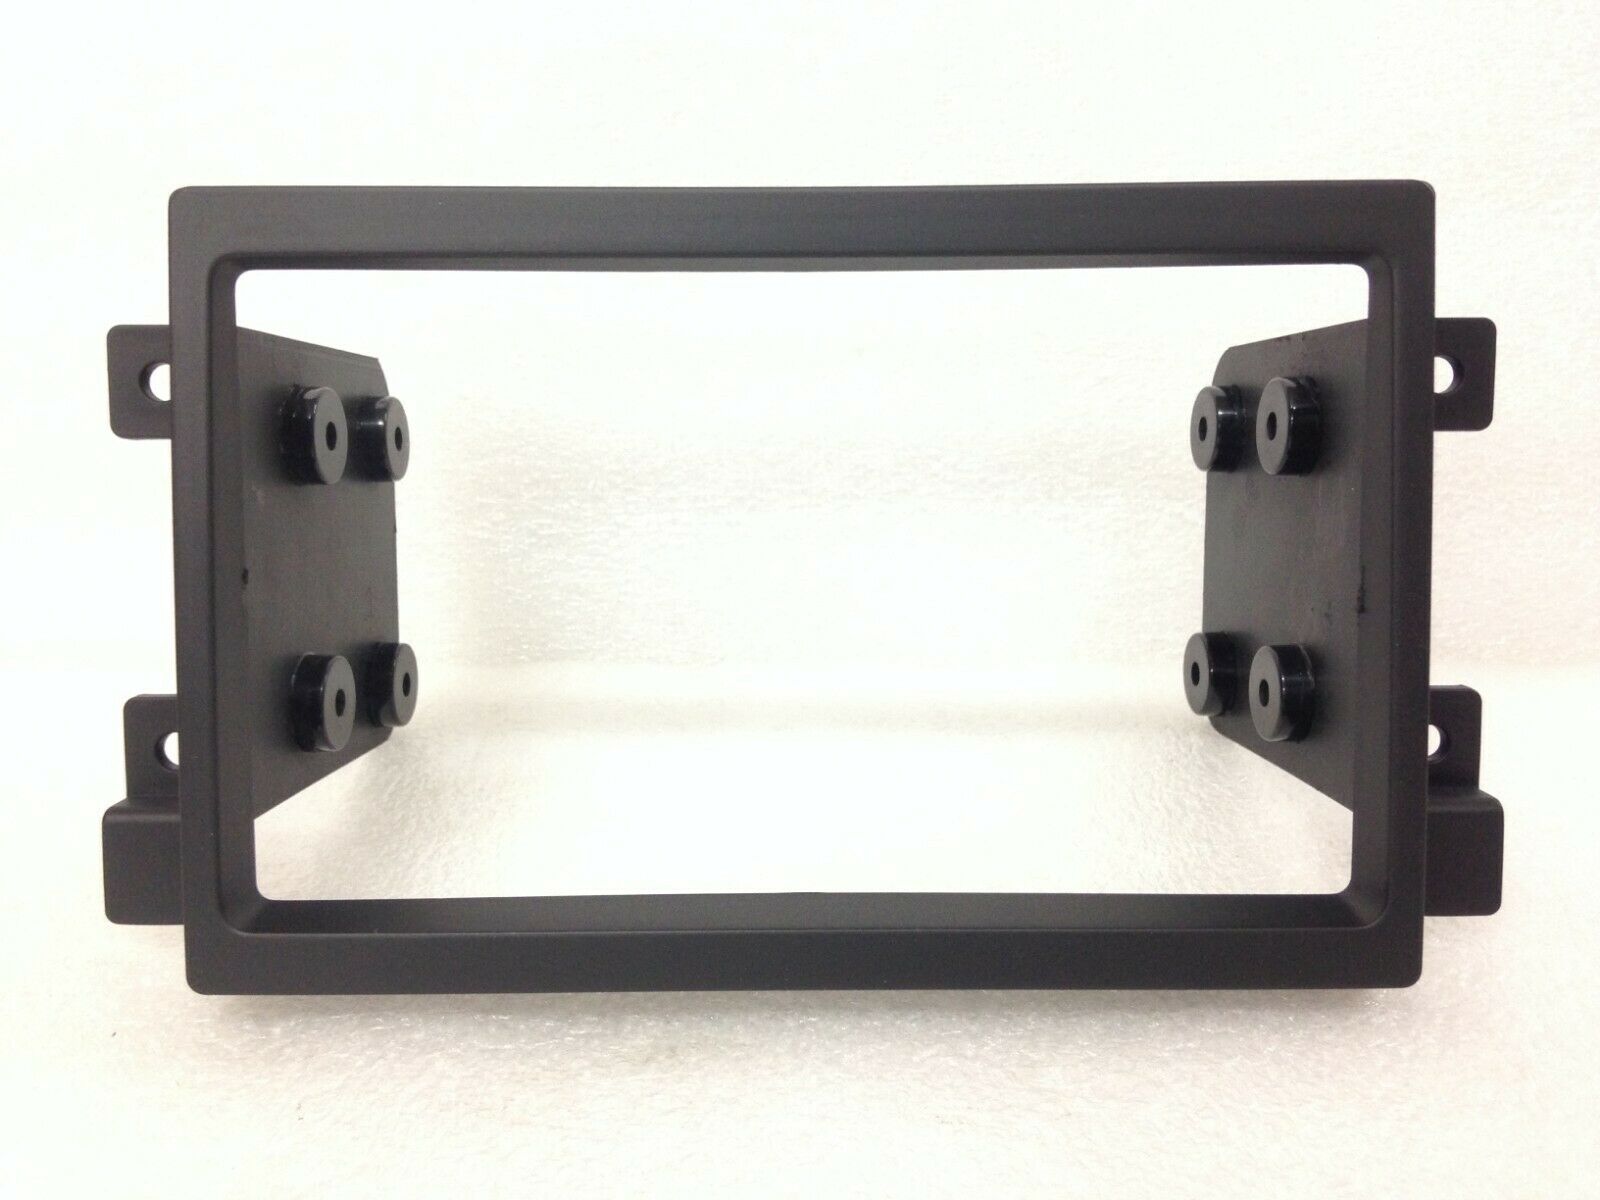 Ford double DIN install adapter trim piece for aftermarket radio